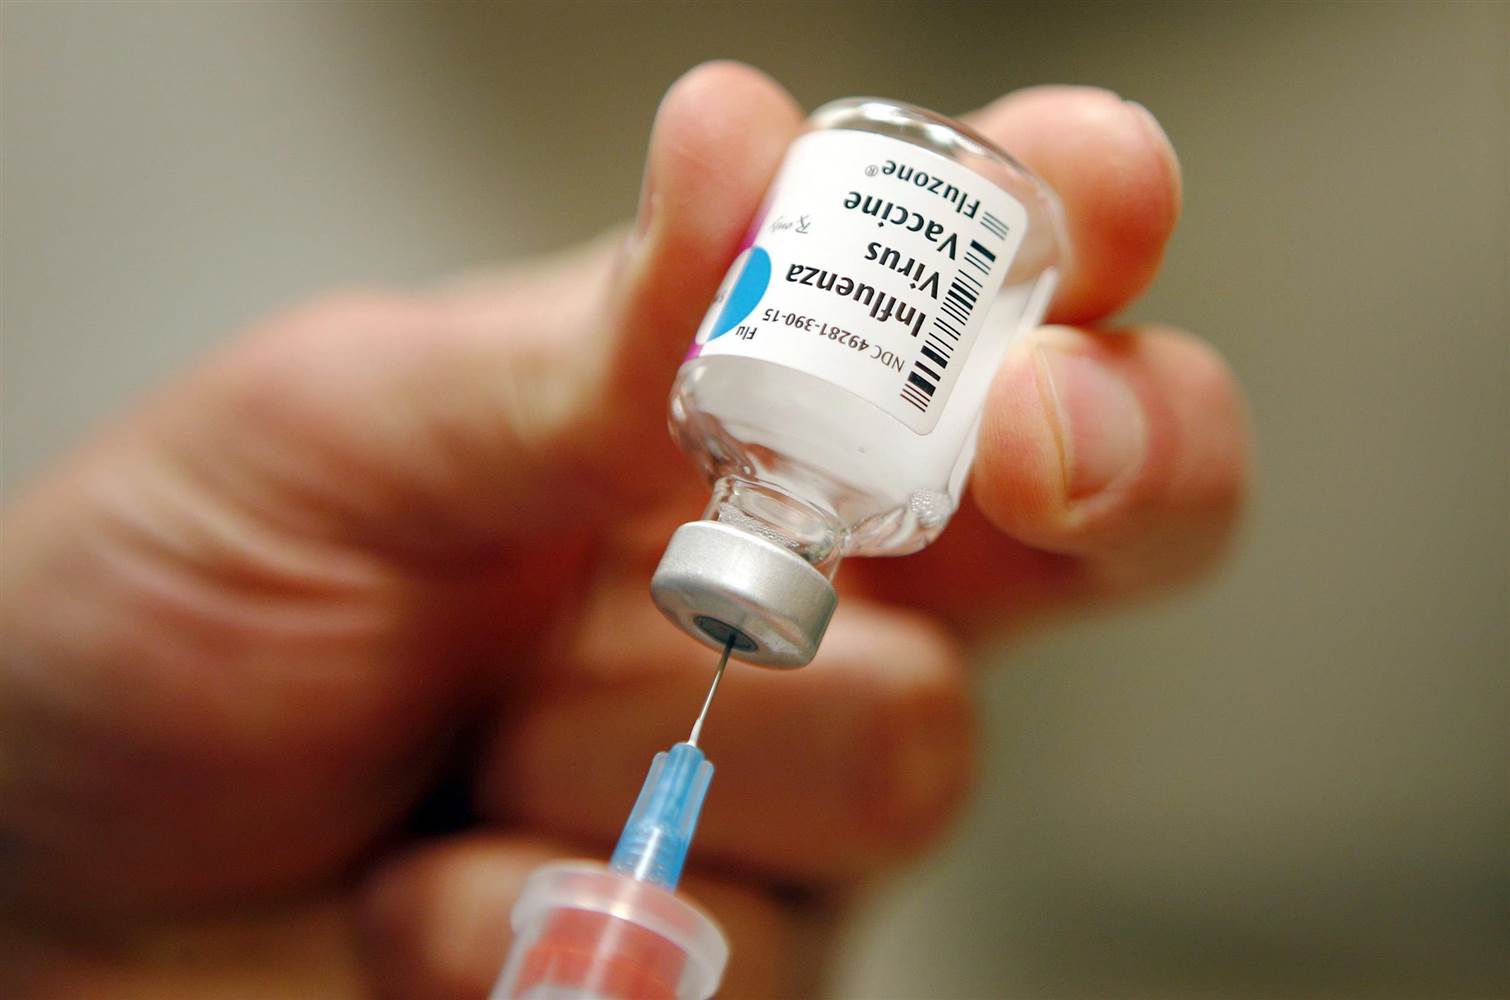 Pro-Vaccine Medical Doctor and Scientist Speaks Out on Fraud of the Flu Vaccine